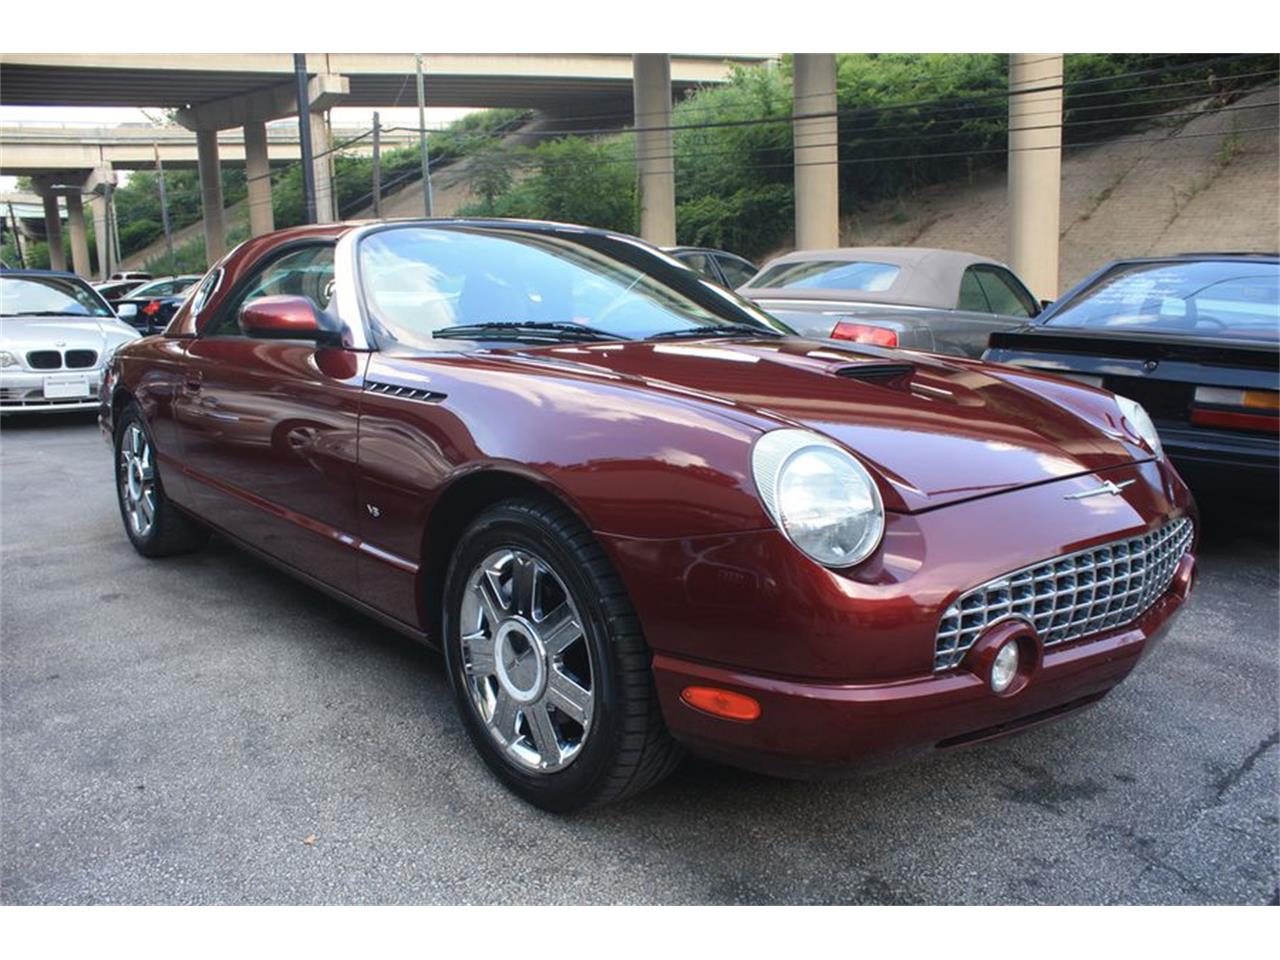 2004 ford thunderbird review